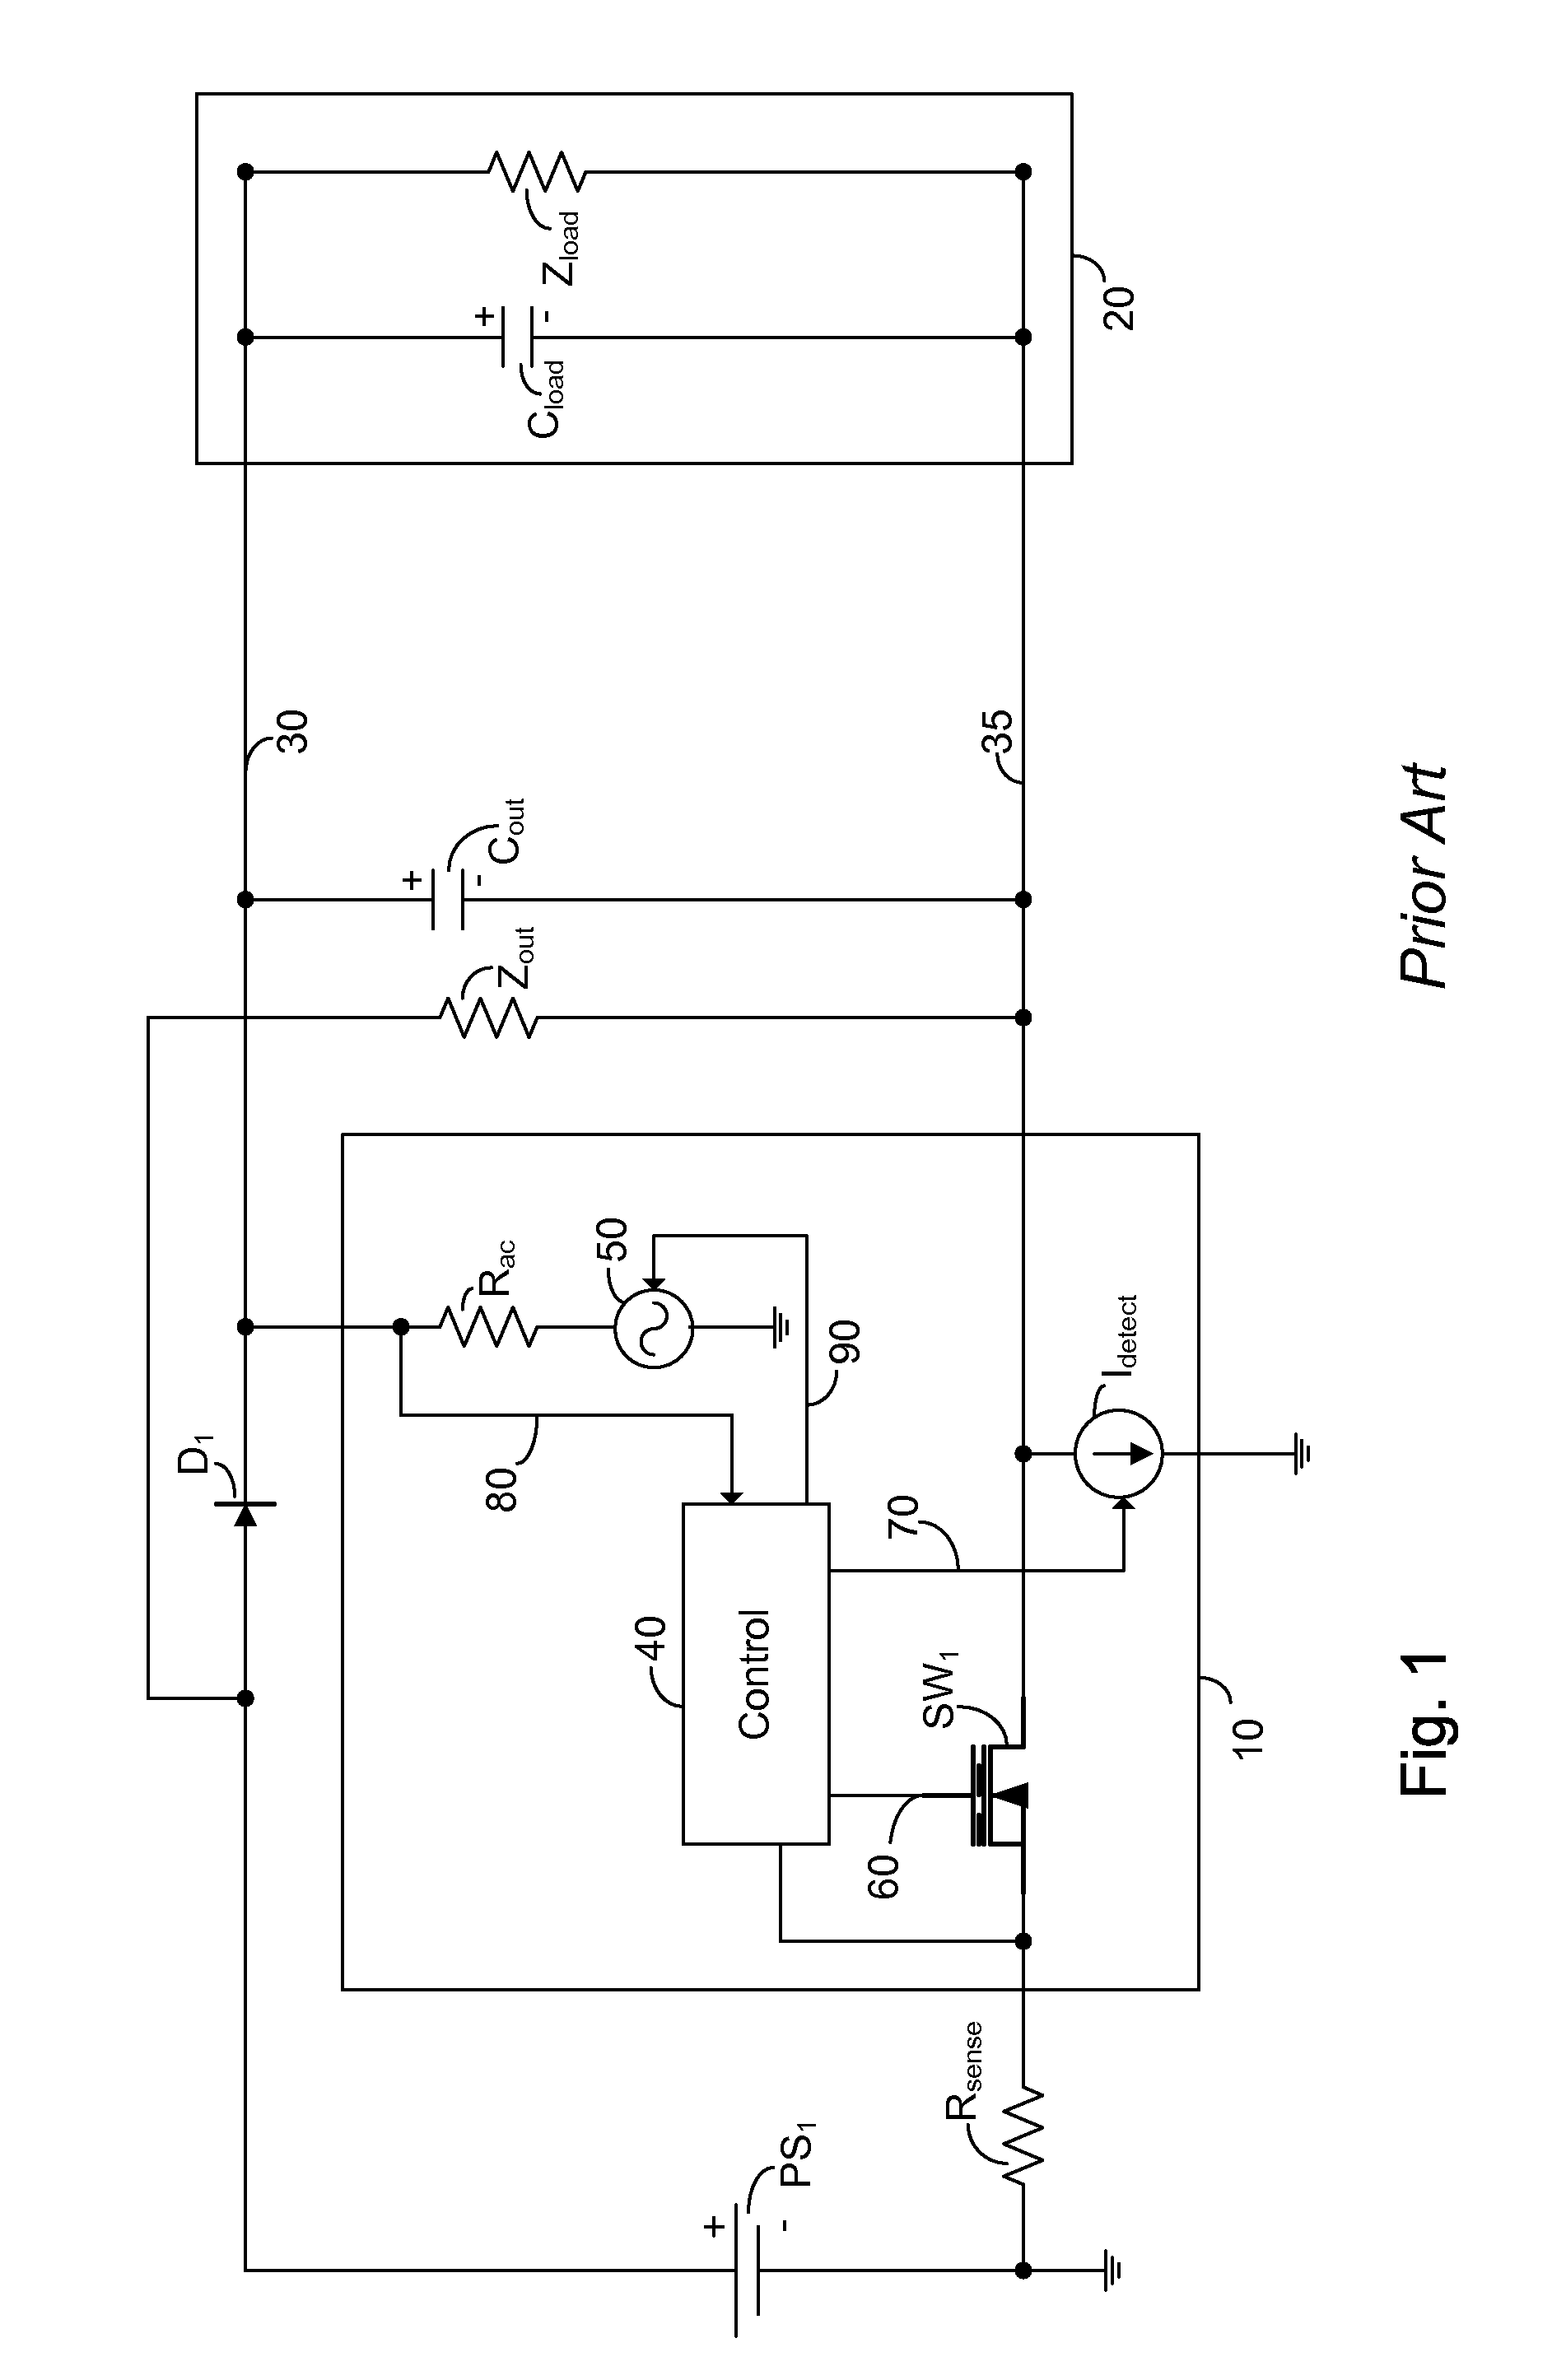 Bypass discharge path for a power sourcing equipment